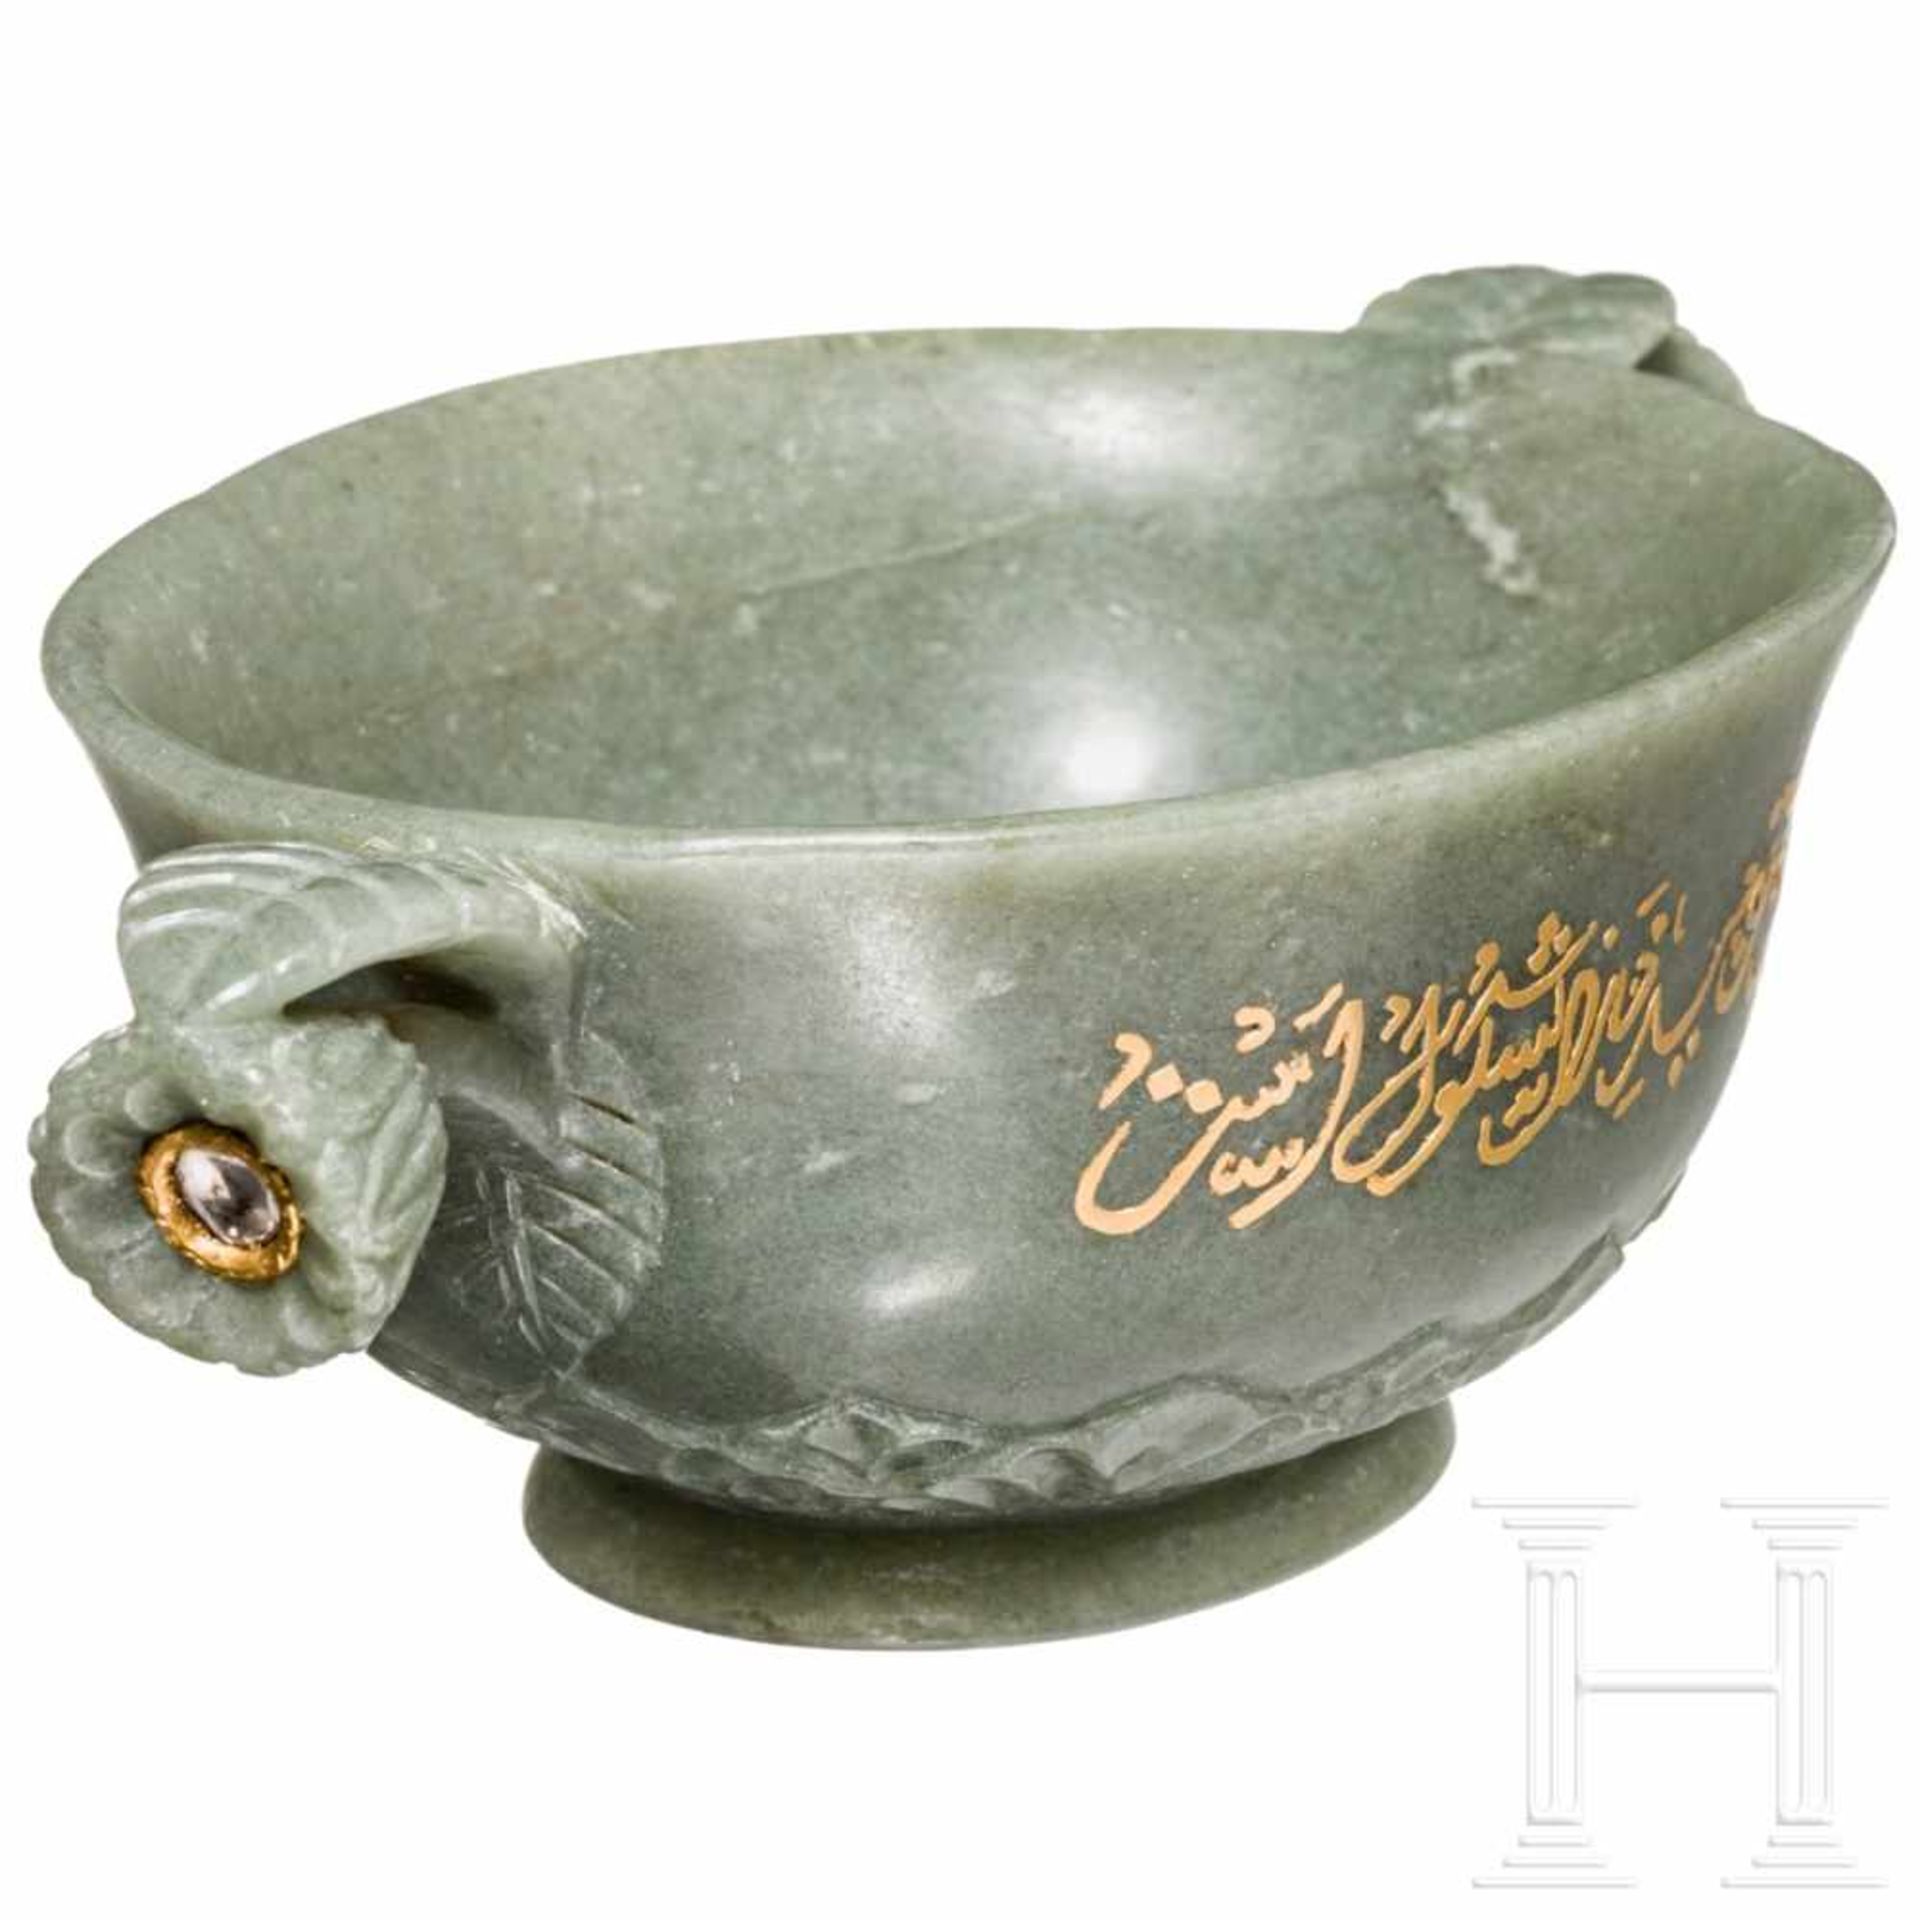 An Indian gold and diamond-studded jade receptacle, 20th centuryOval bowl in greyish-green jade with - Bild 2 aus 5